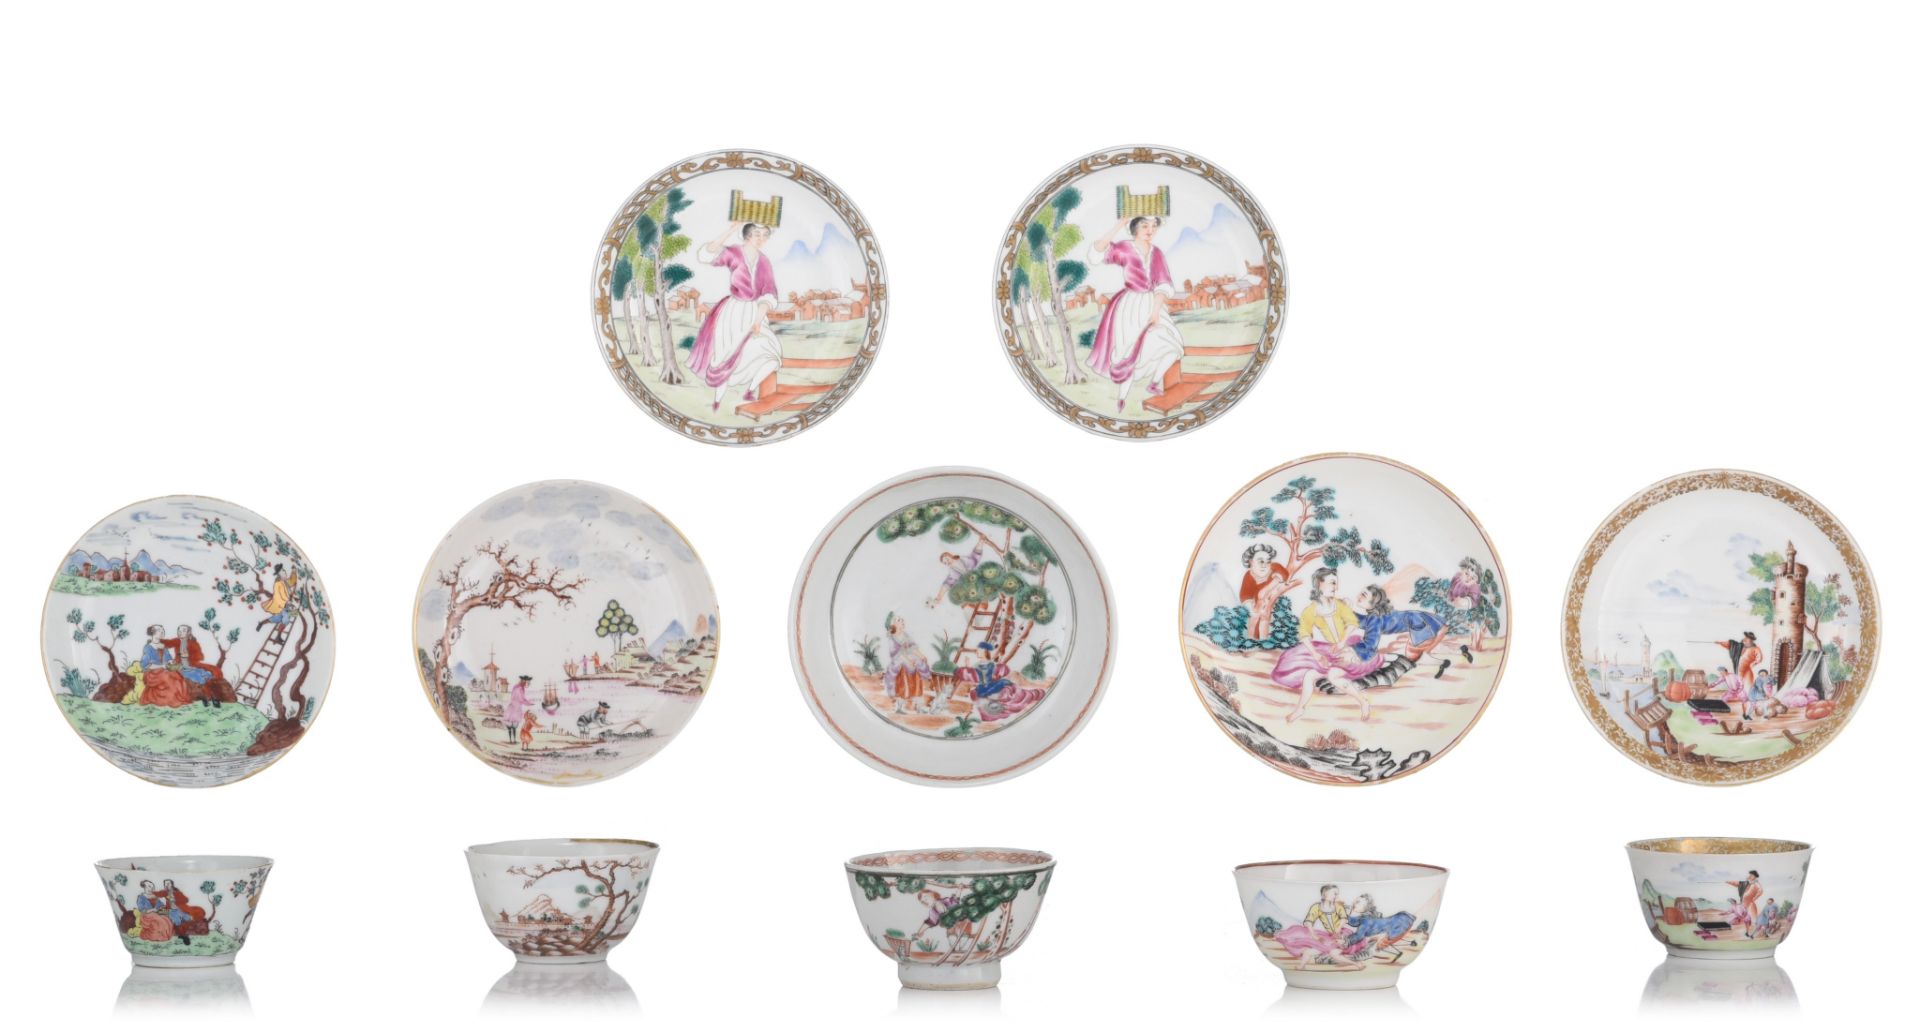 (BIDDING ONLY ON CARLOBONTE.BE) A collection of five matching sets of Chinese famille rose export te